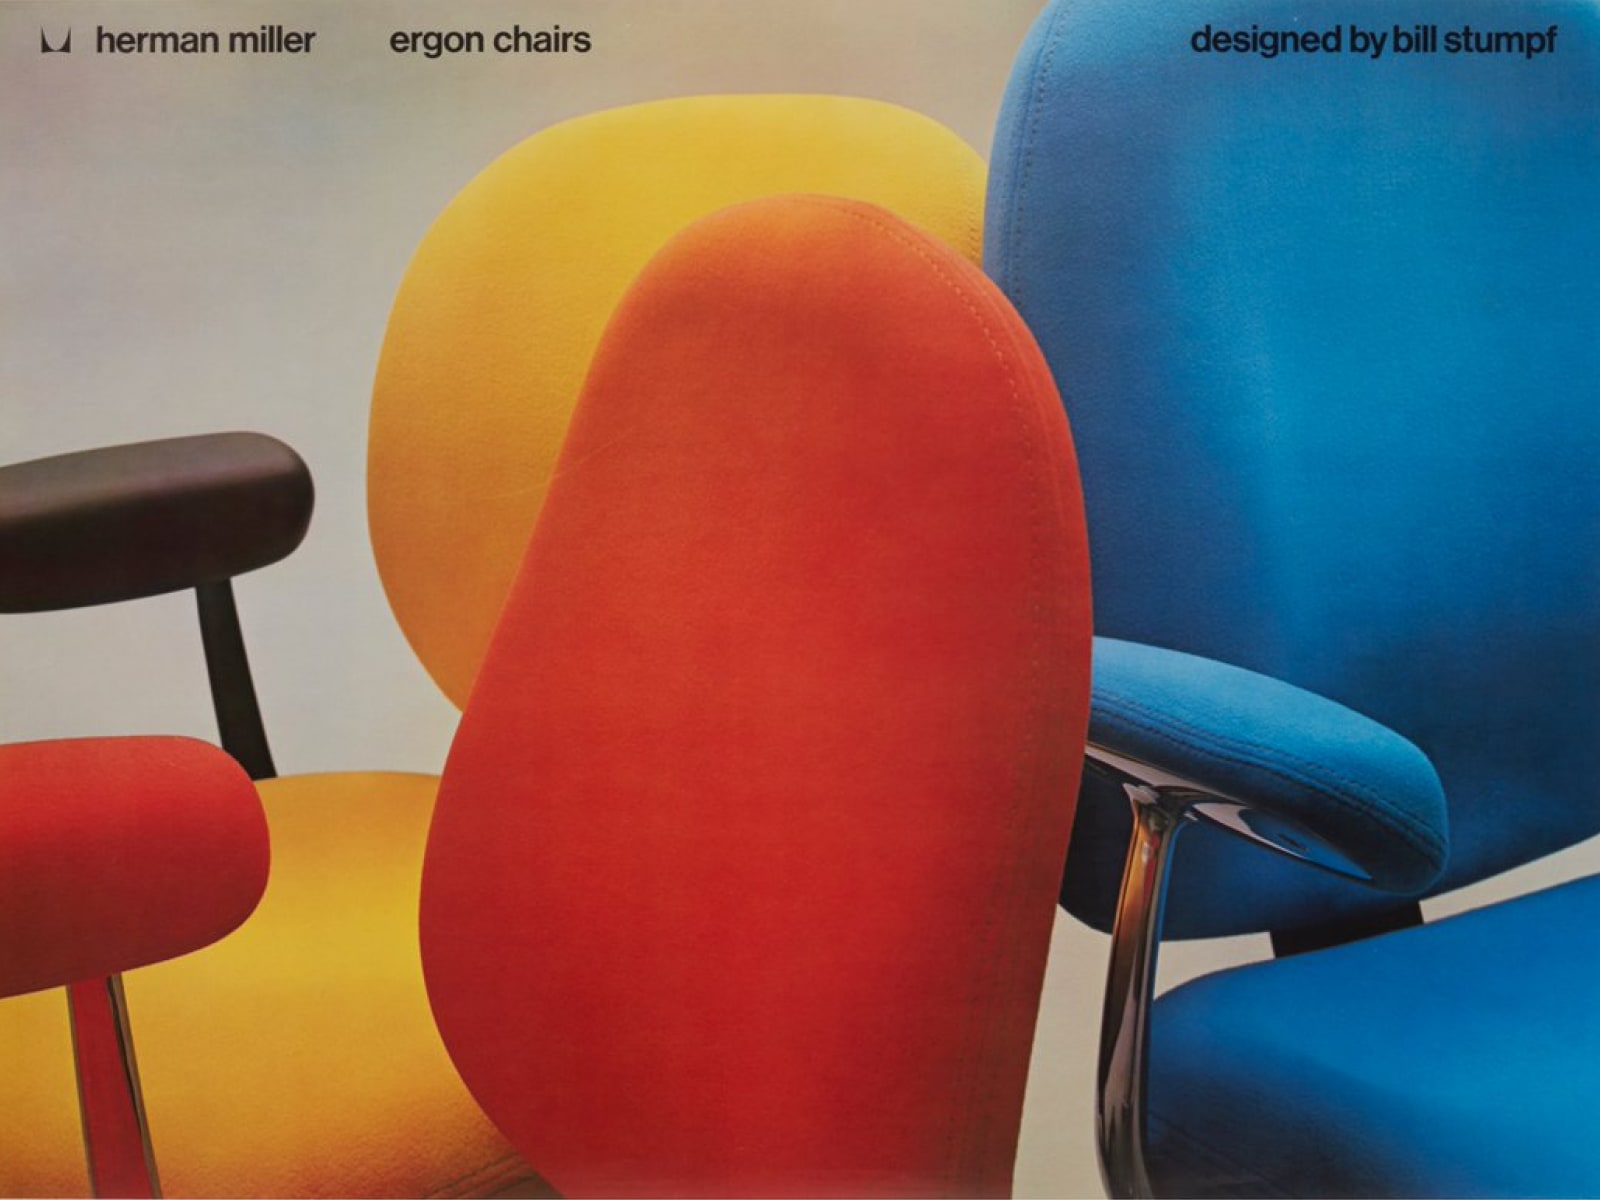 Three Ergon Chairs shown in red, yellow, and blue.